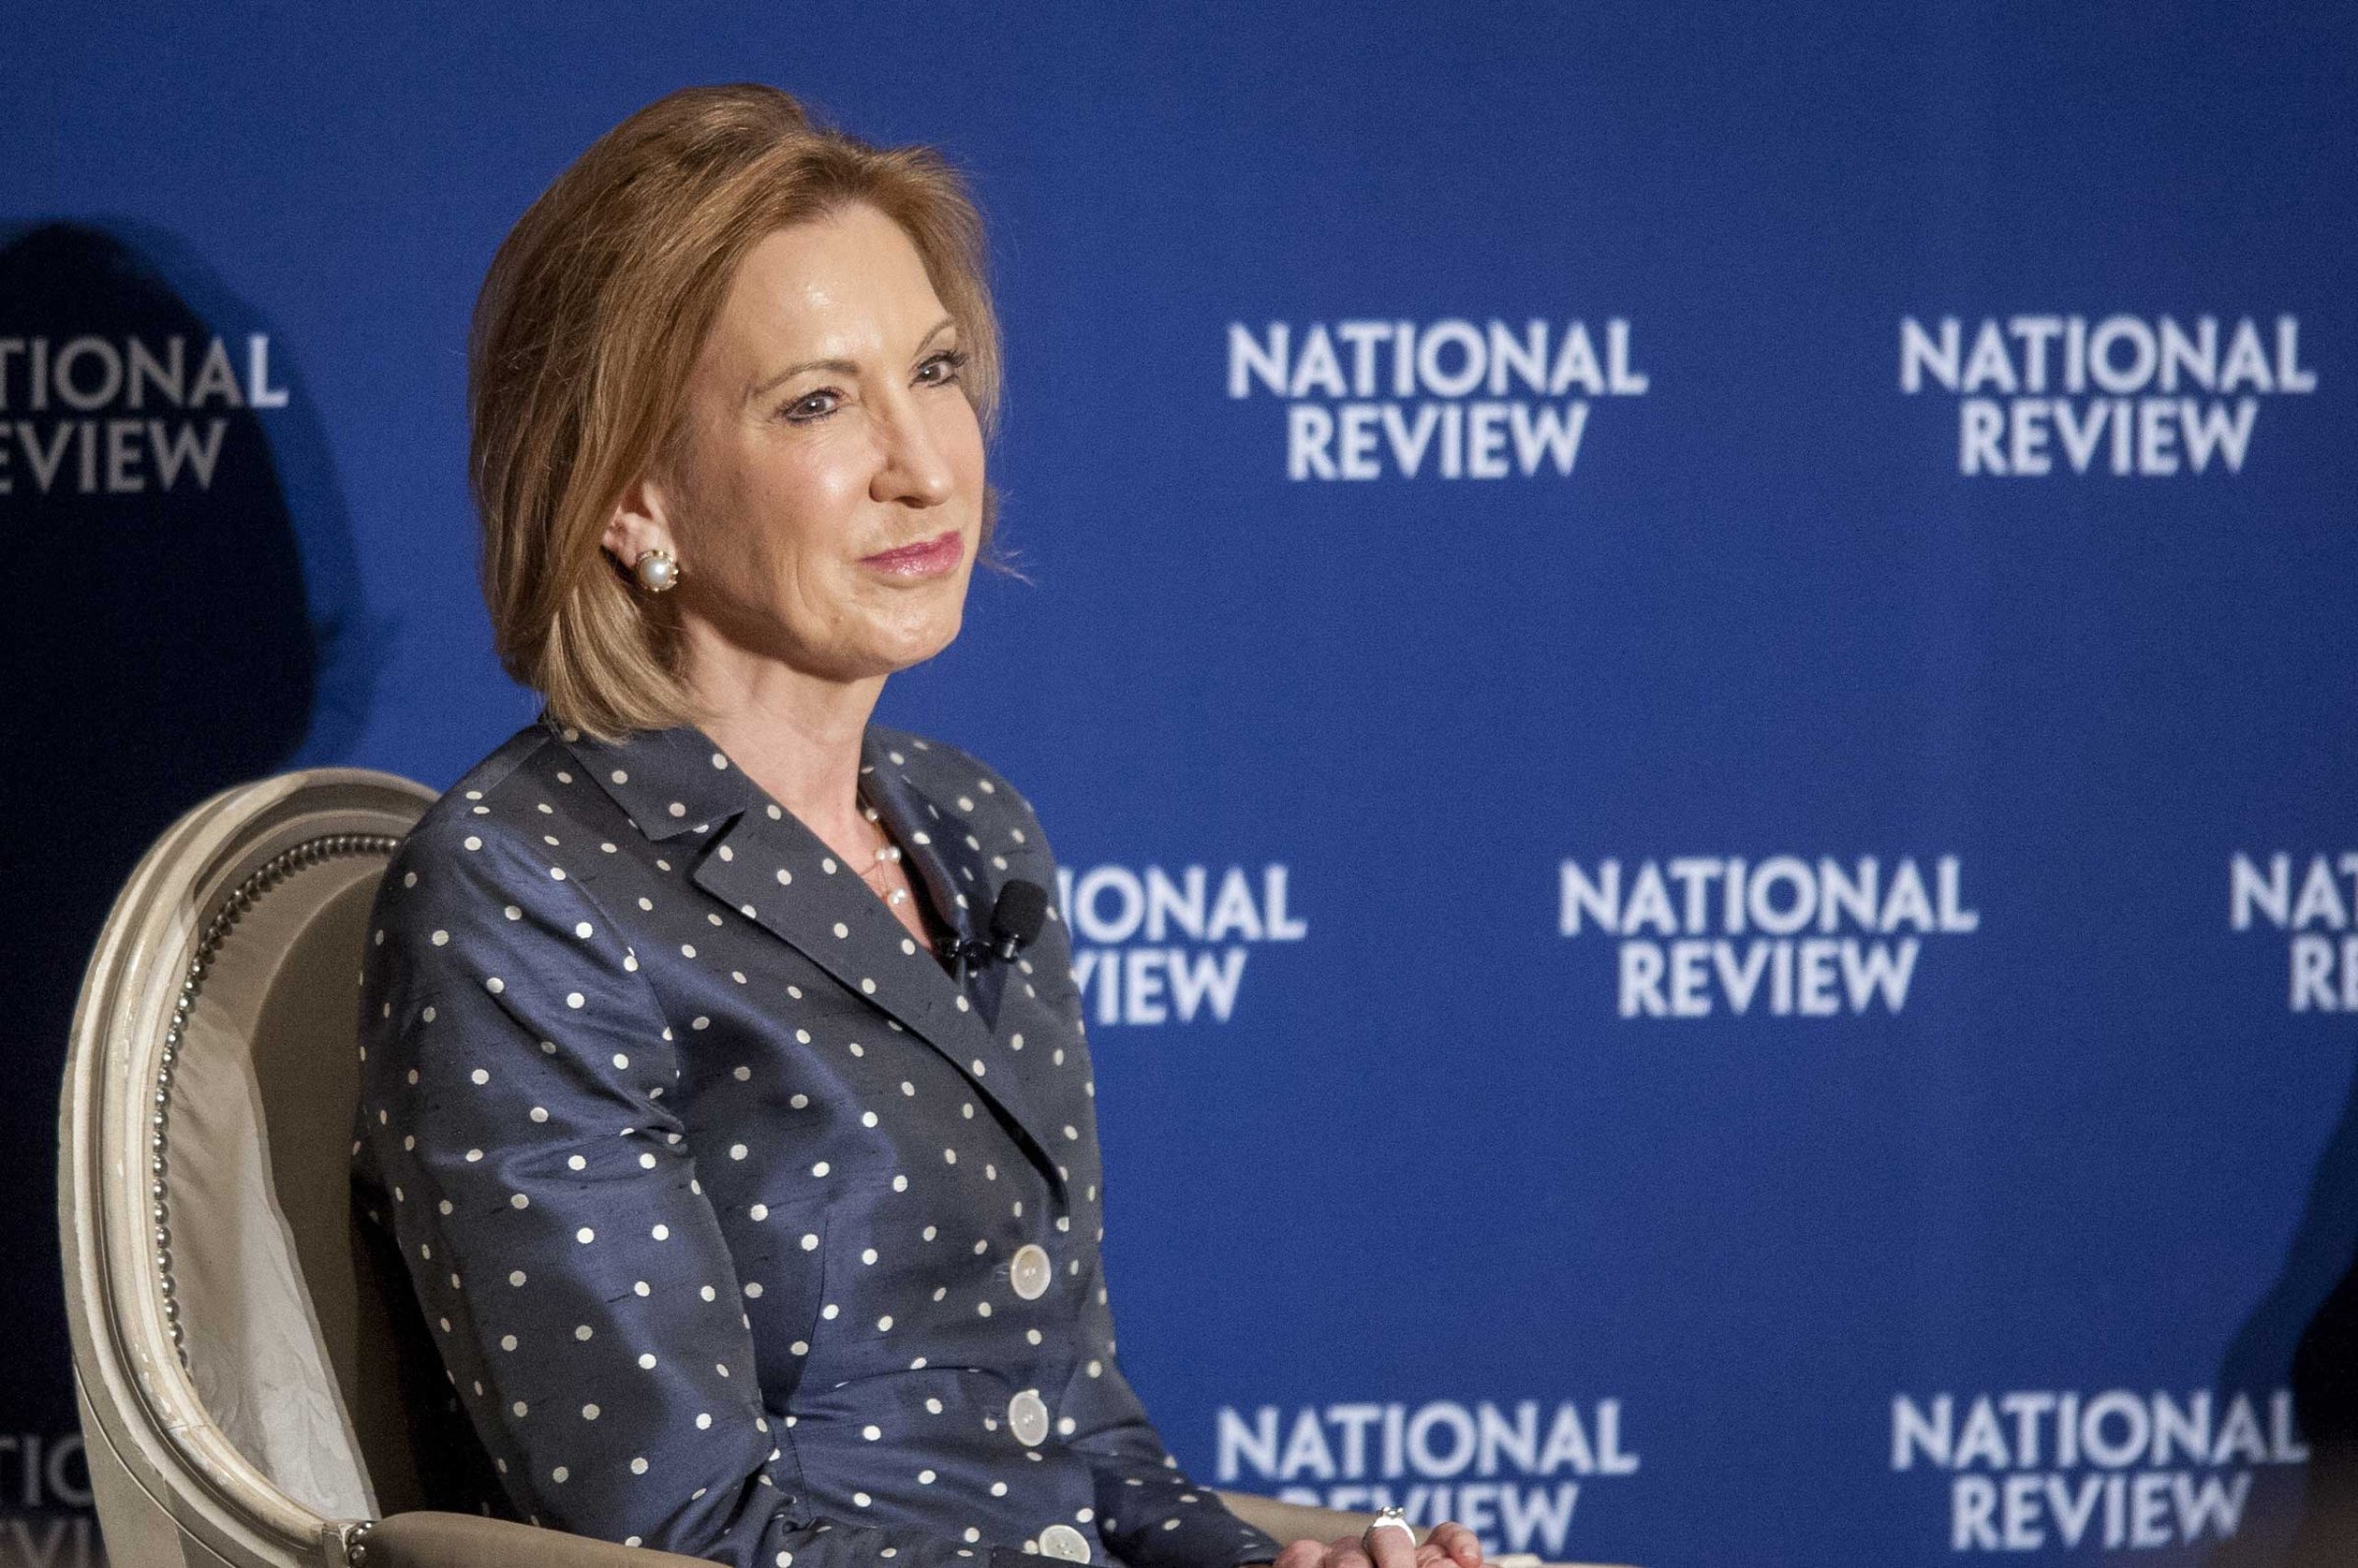 Carly Fiorina participates in a discussion during the 2015 National Review Ideas Summit held at the Willard InterContinental Hotel in Washington on May 2, 2015.